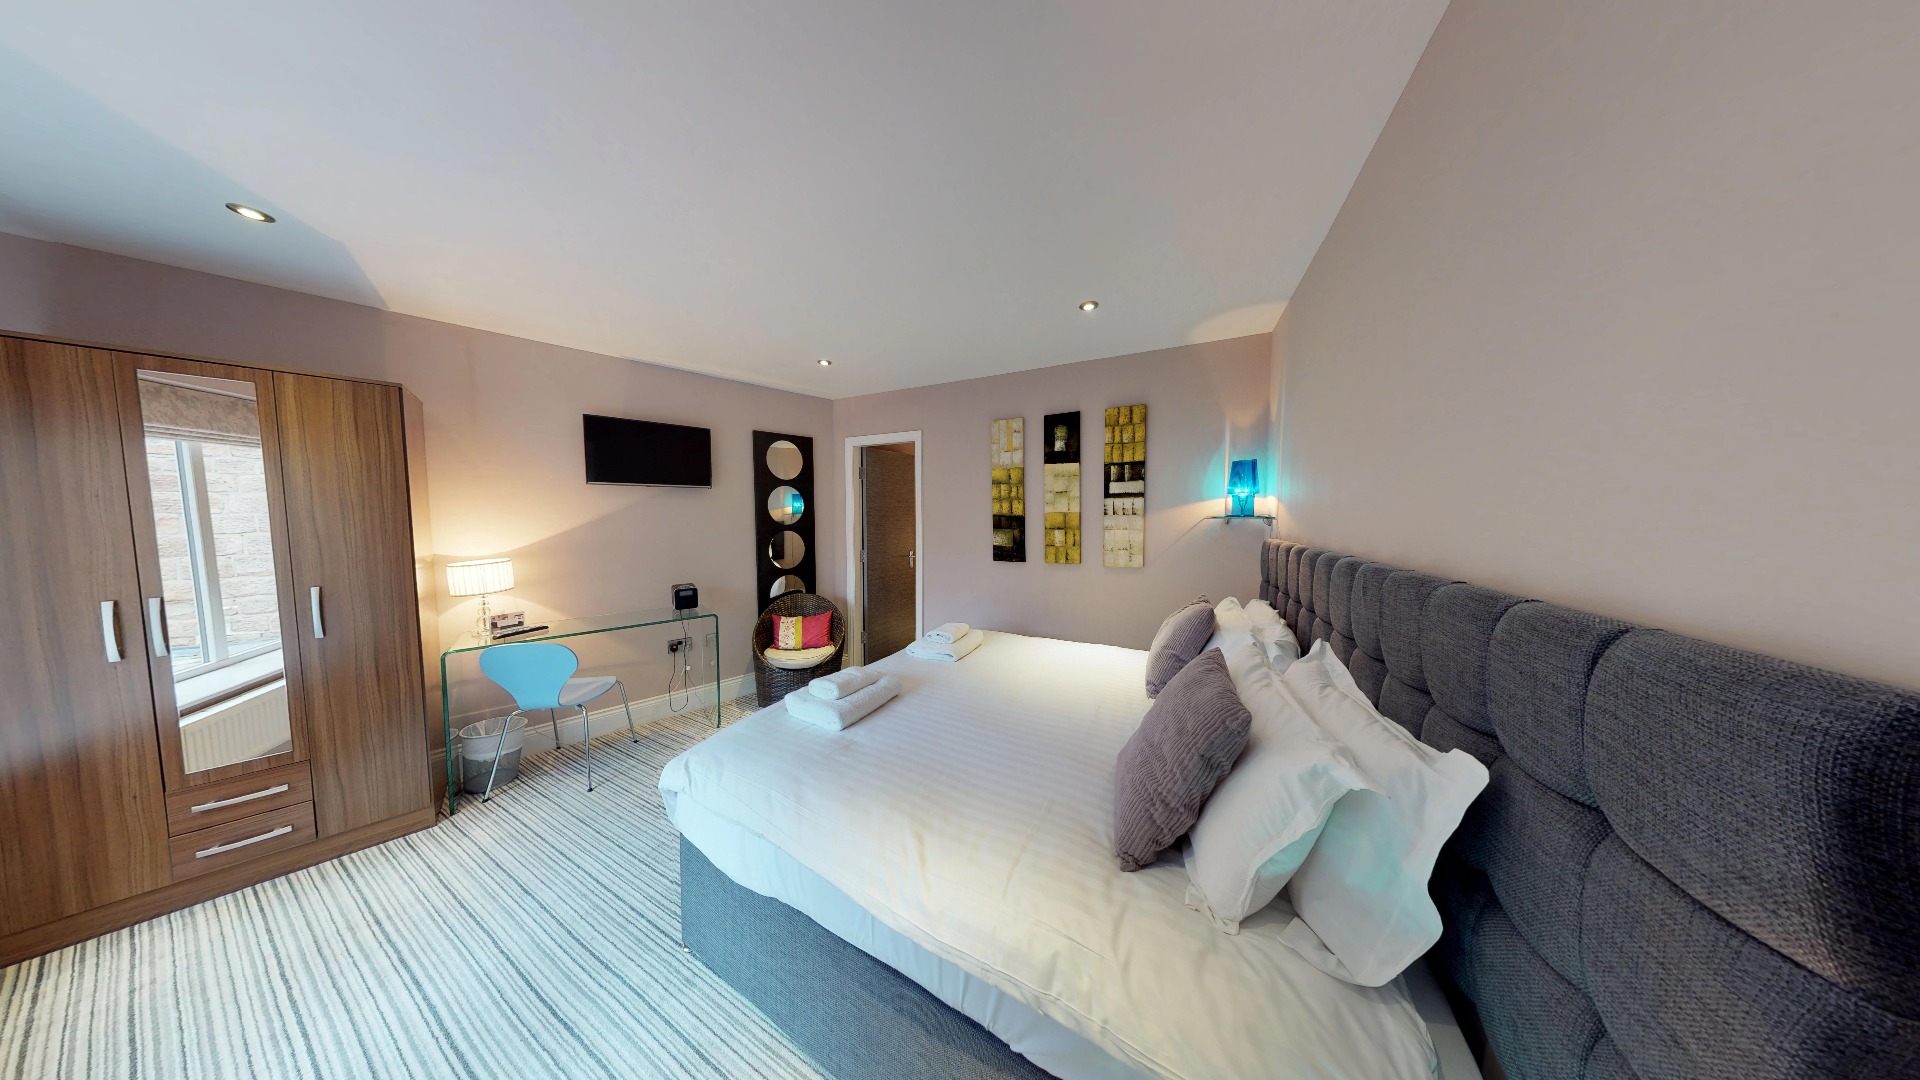 harrogate serviced apartments relocating to harrogate north yorkshire and need short term accommodation